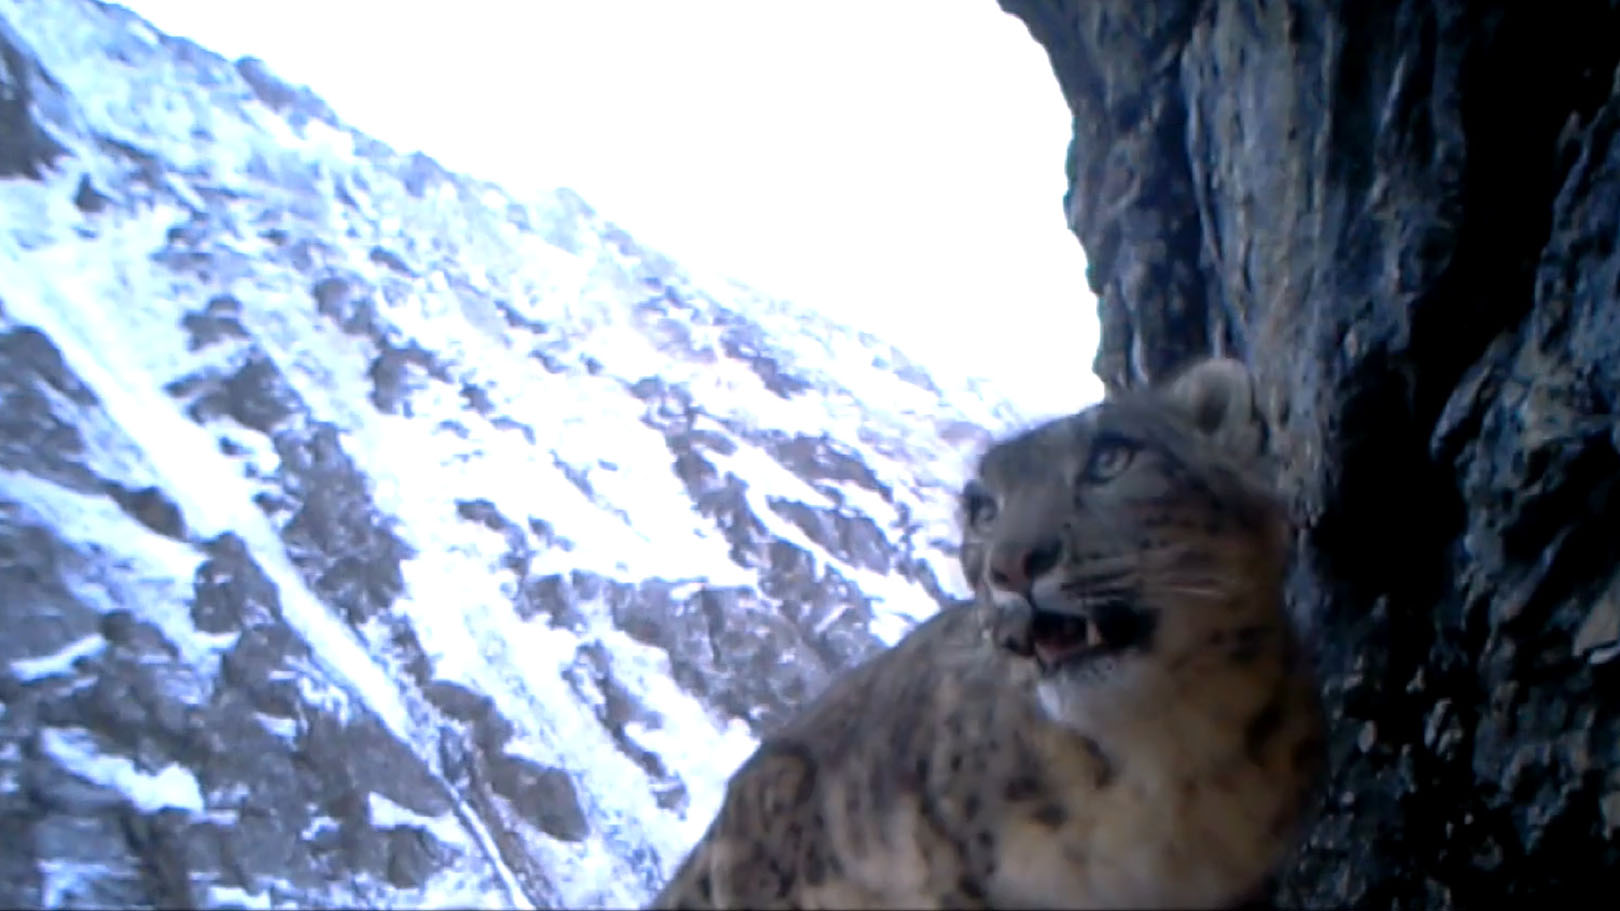 XINJIANG: Tracking the elusive snow leopard